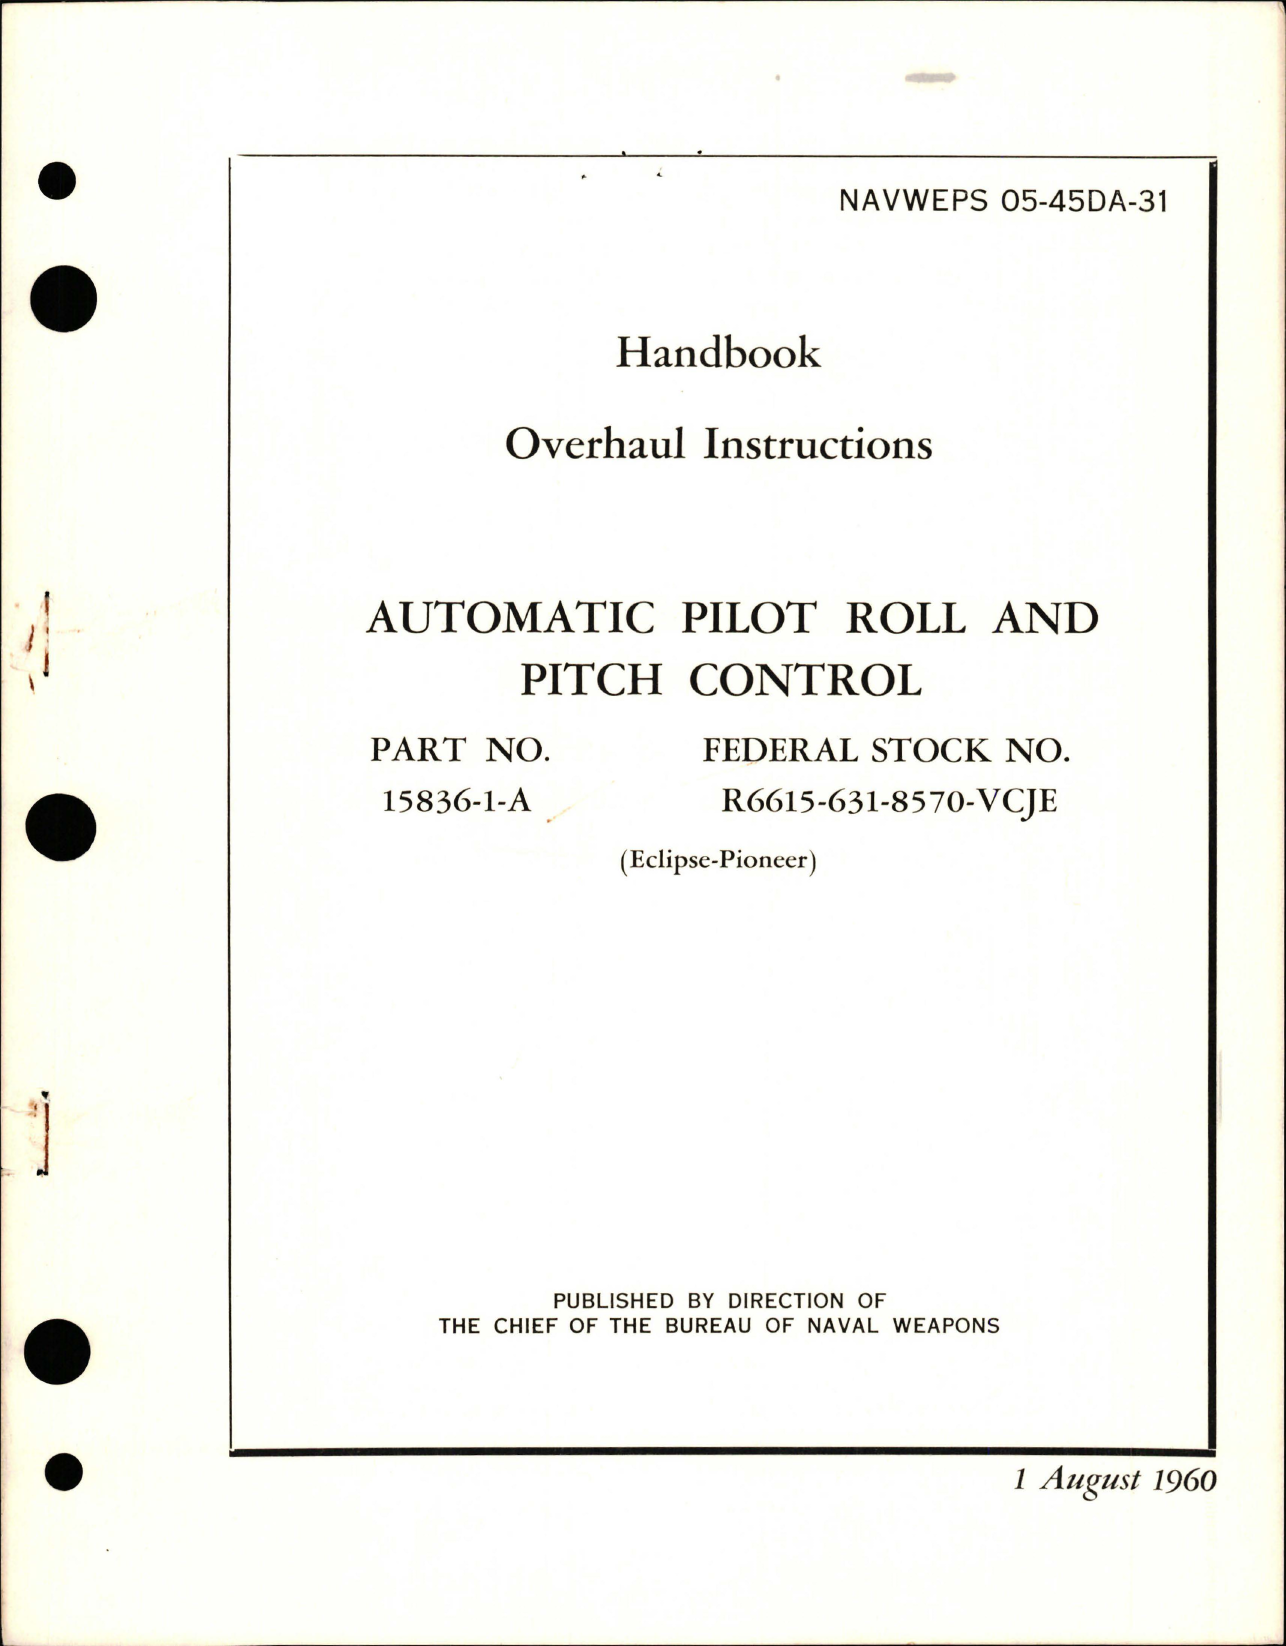 Sample page 1 from AirCorps Library document: Overhaul Instructions for Automatic Pilot Roll and Pitch Control - Part 15836-1-A 